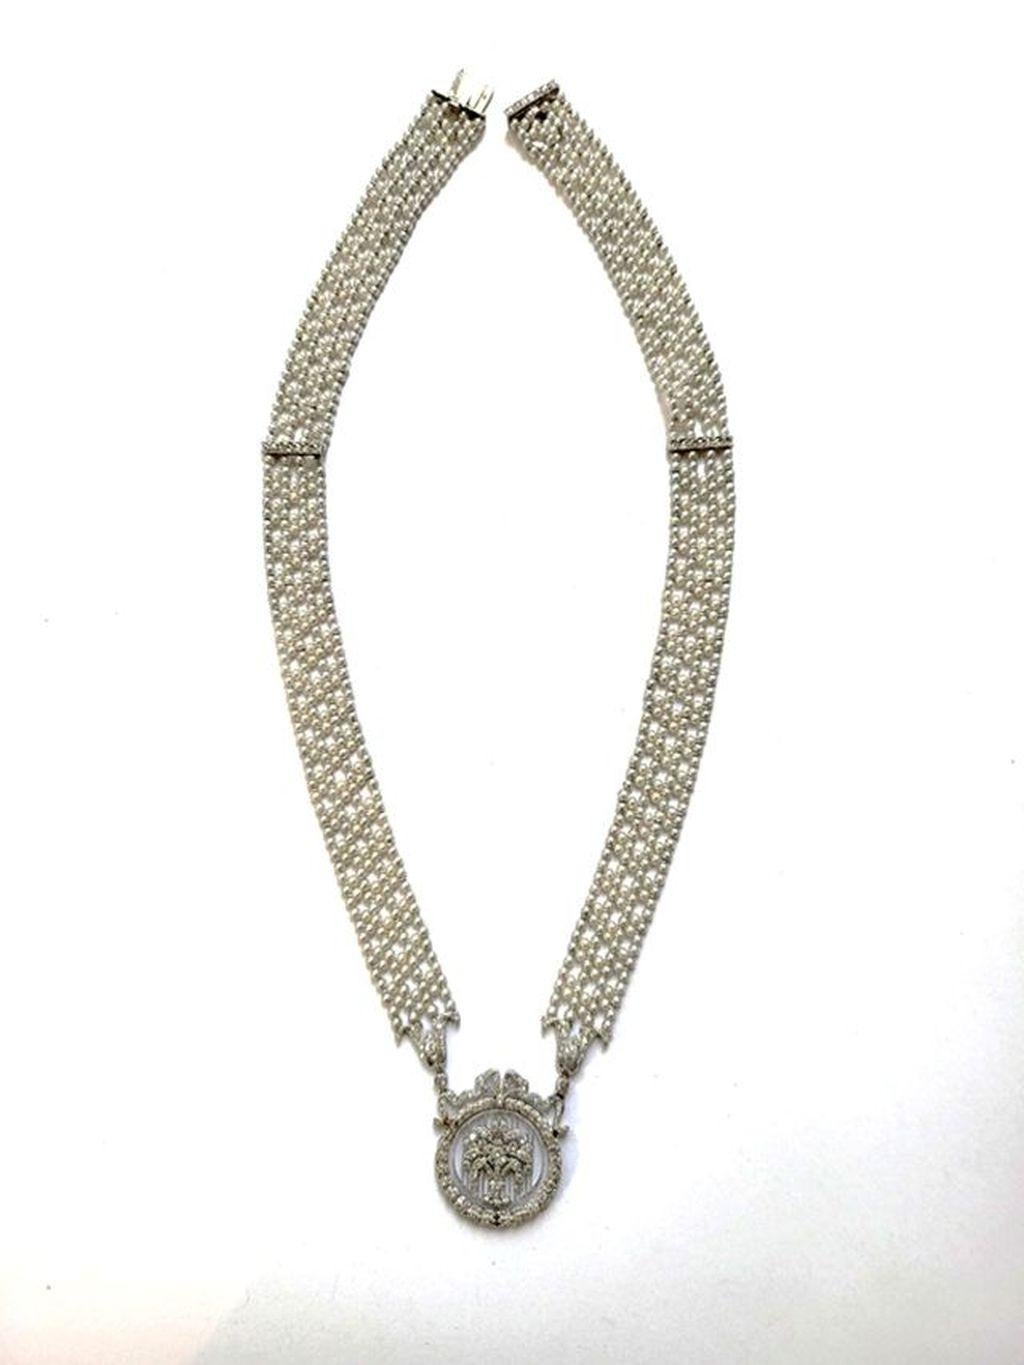 An exquisite creation of jewelry making!
This Edwardian neckless is composed of rose cut diamonds set in platinum and lustrous seed pearls arranged in a refined pattern. 
The beautiful lattice work of the diamond pendant in form of a flower basket